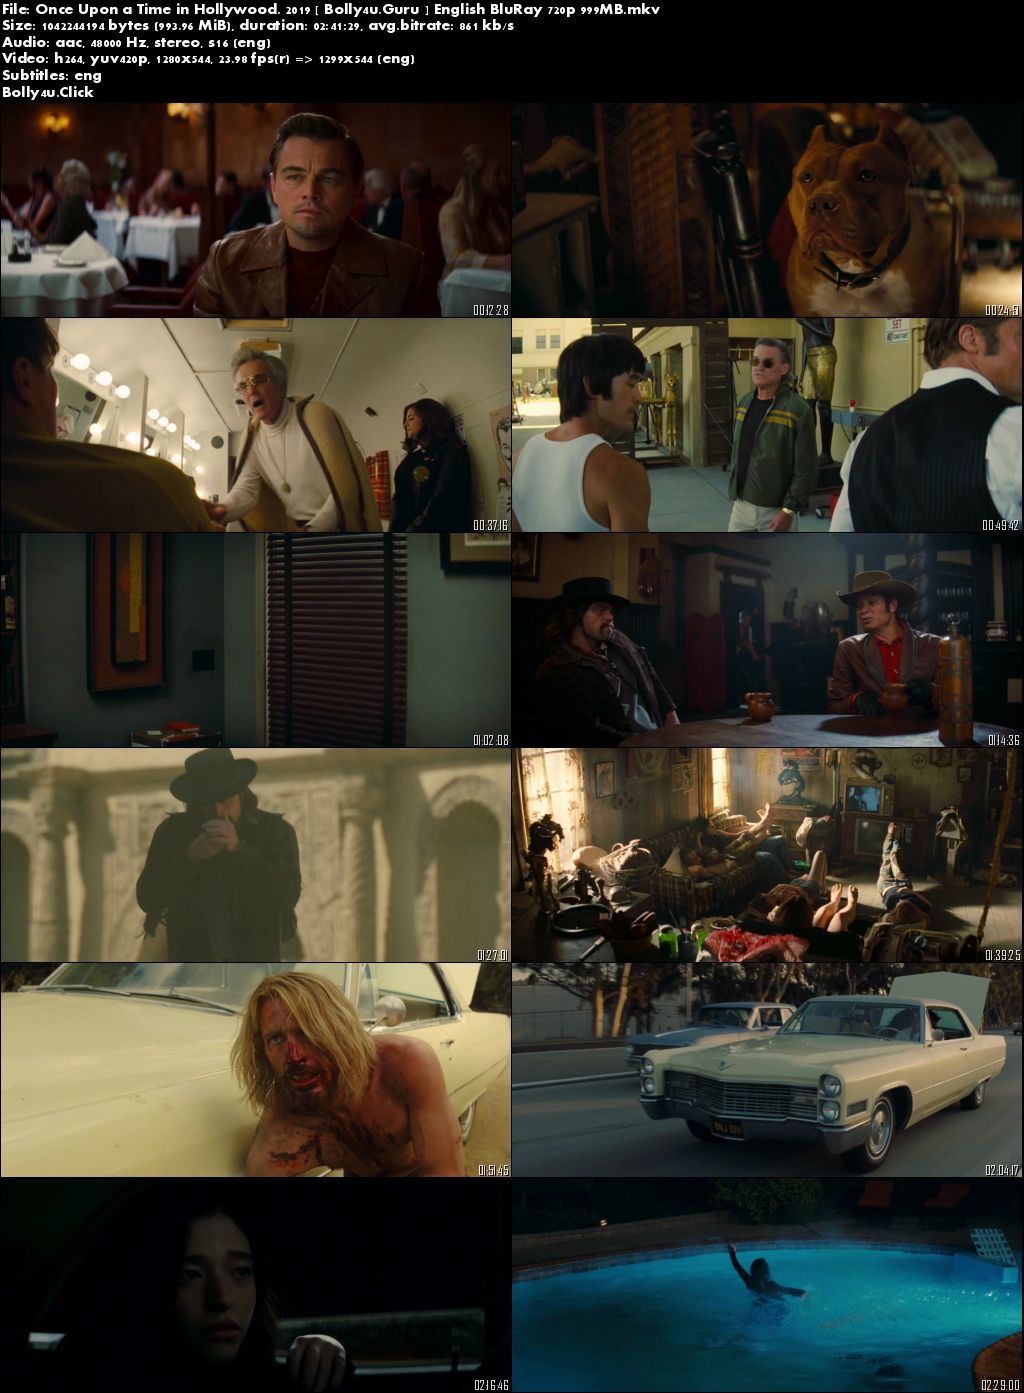 Once Upon a Time in Hollywood 2019 BRRip 999Mb English 720p ESub Download